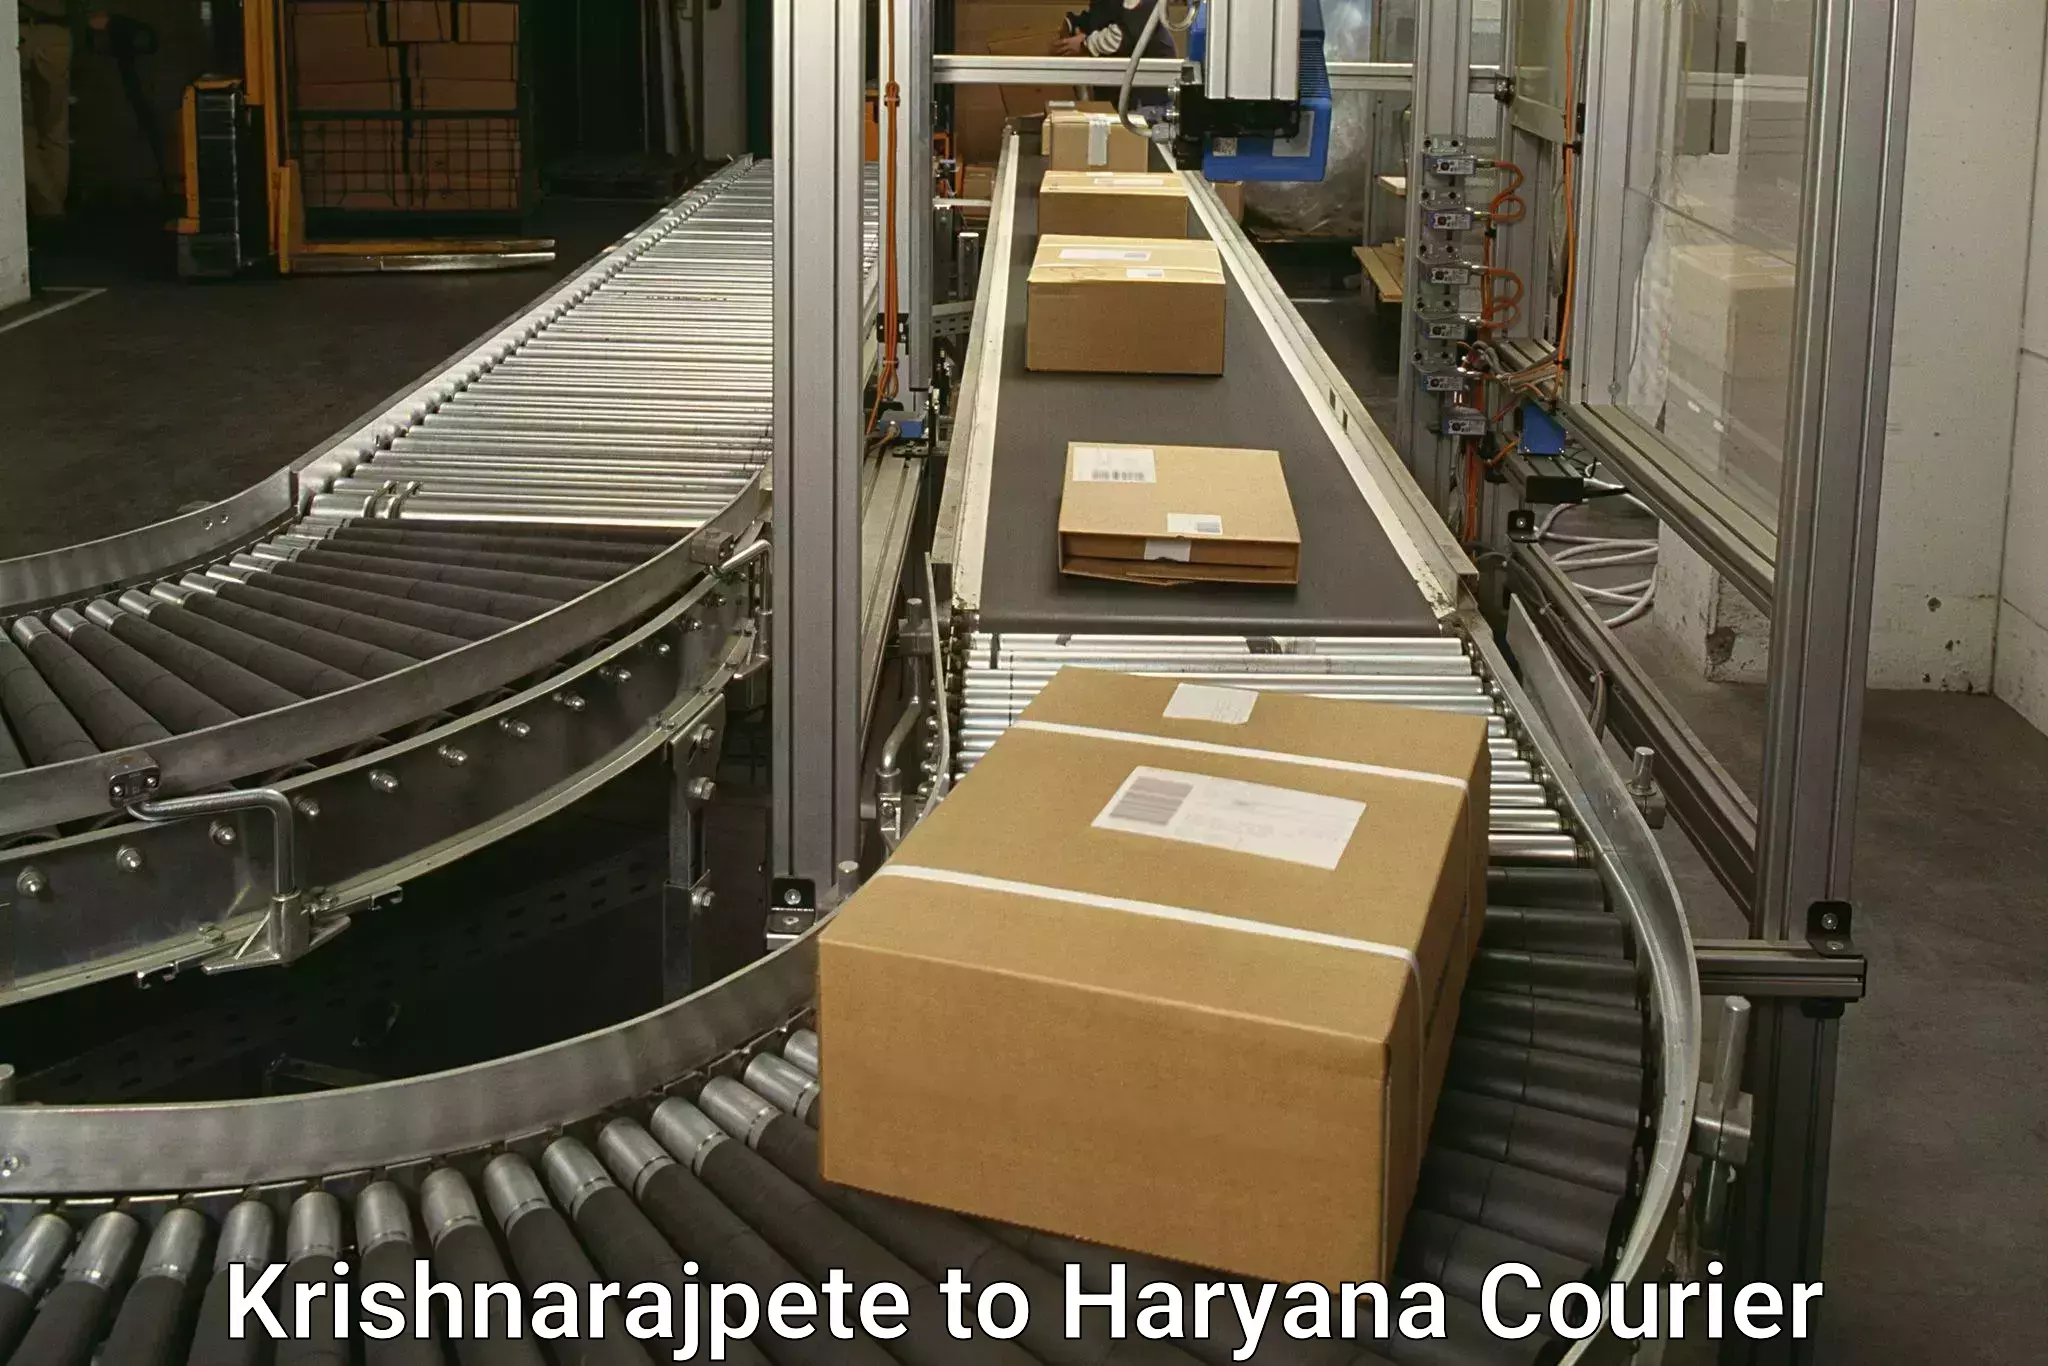 Large-scale shipping solutions Krishnarajpete to Chaudhary Charan Singh Haryana Agricultural University Hisar